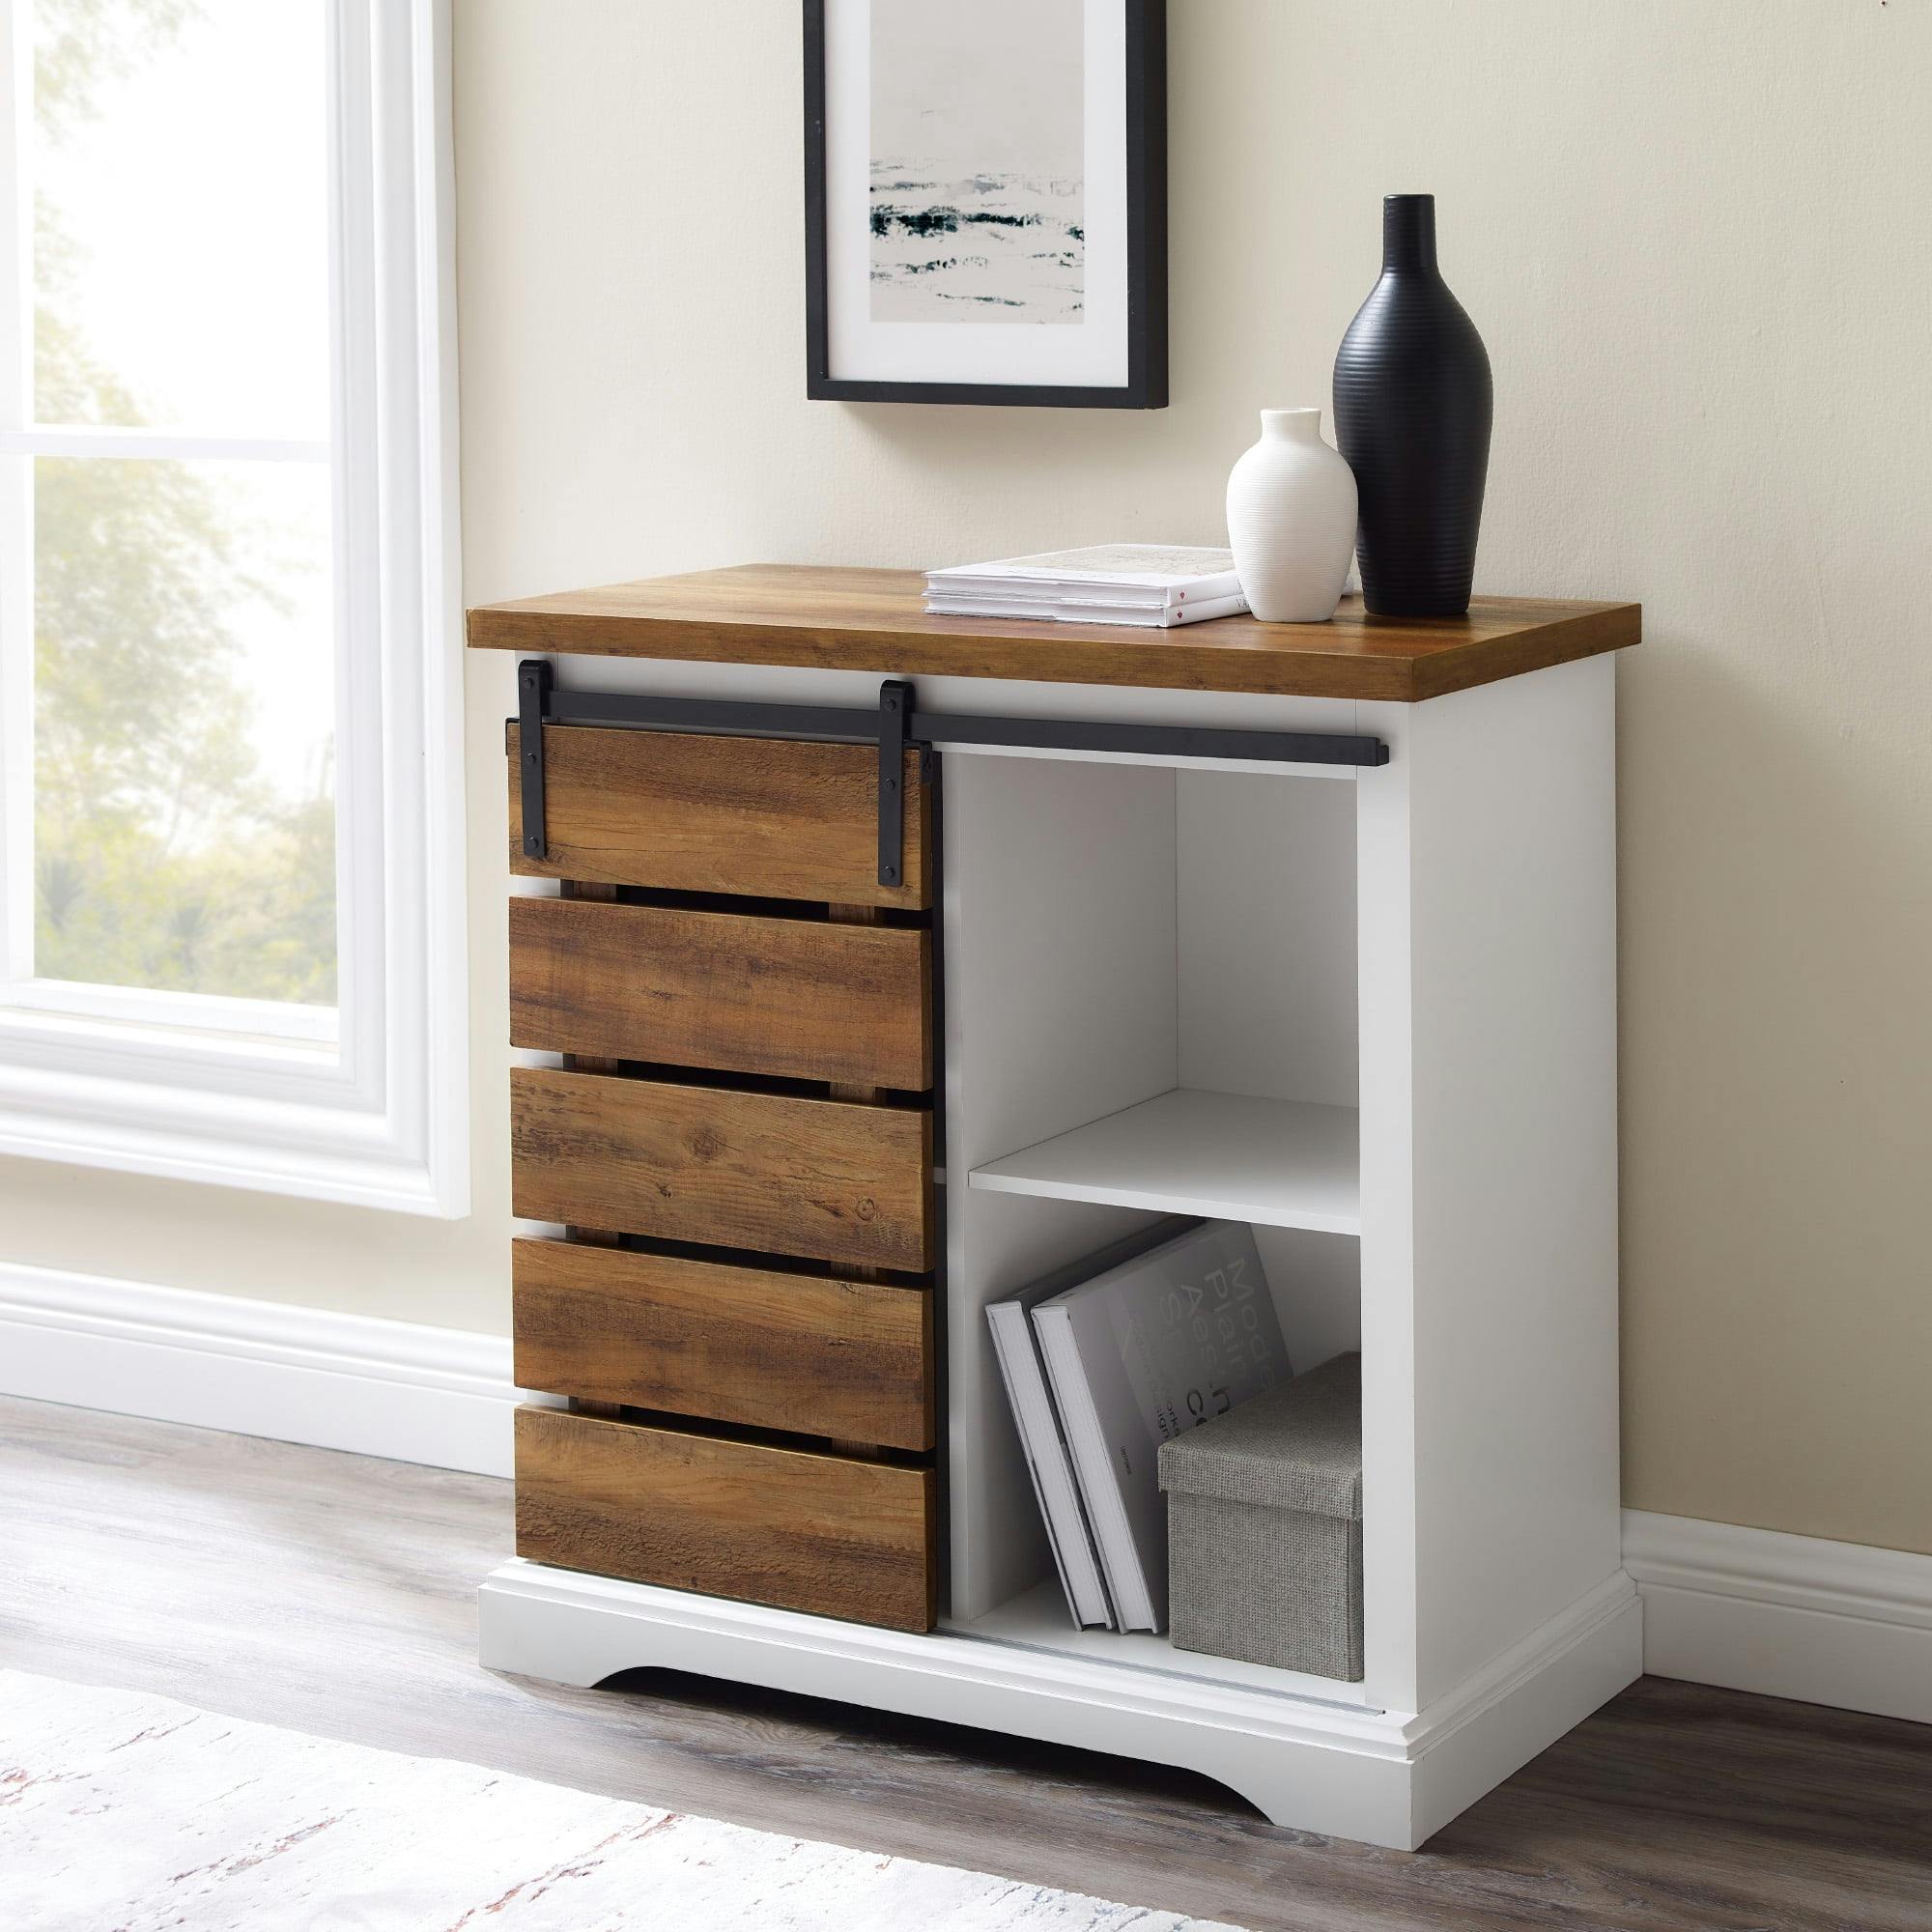 Rustic Oak and Solid White Farmhouse Sliding Cabinet with Adjustable Shelving